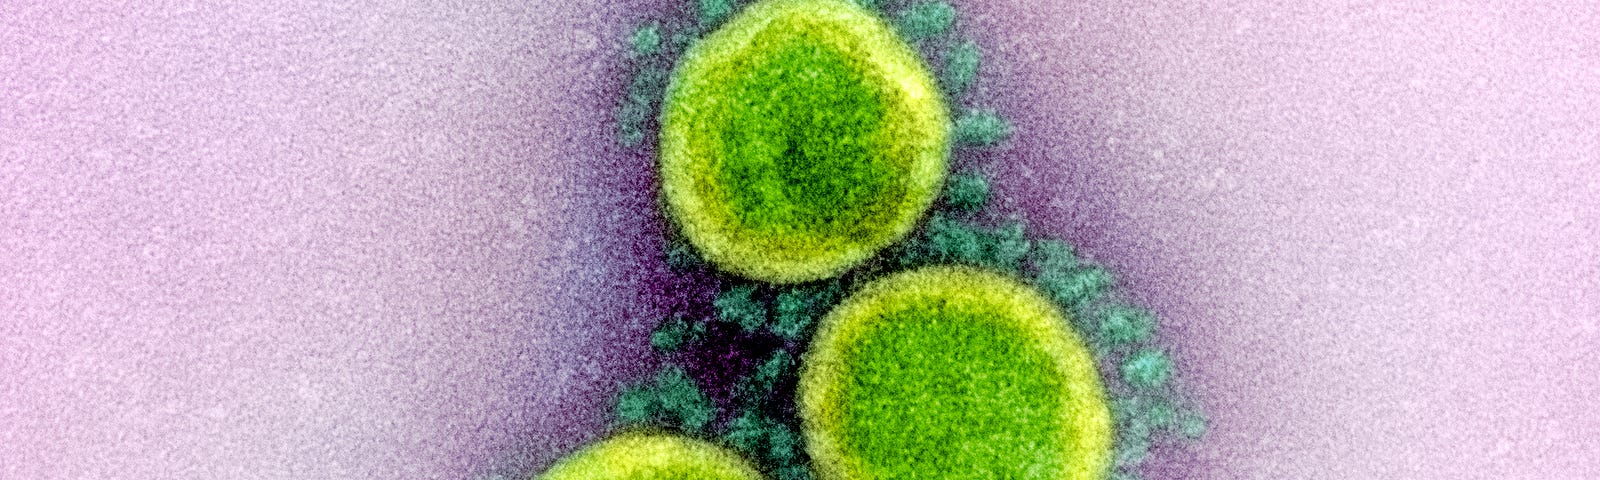 Transmission electron micrograph of SARS-CoV-2 virus particles, isolated from a patient. Image captured and color-enhanced at the NIAID Integrated Research Facility in Fort Detrick, Maryland.